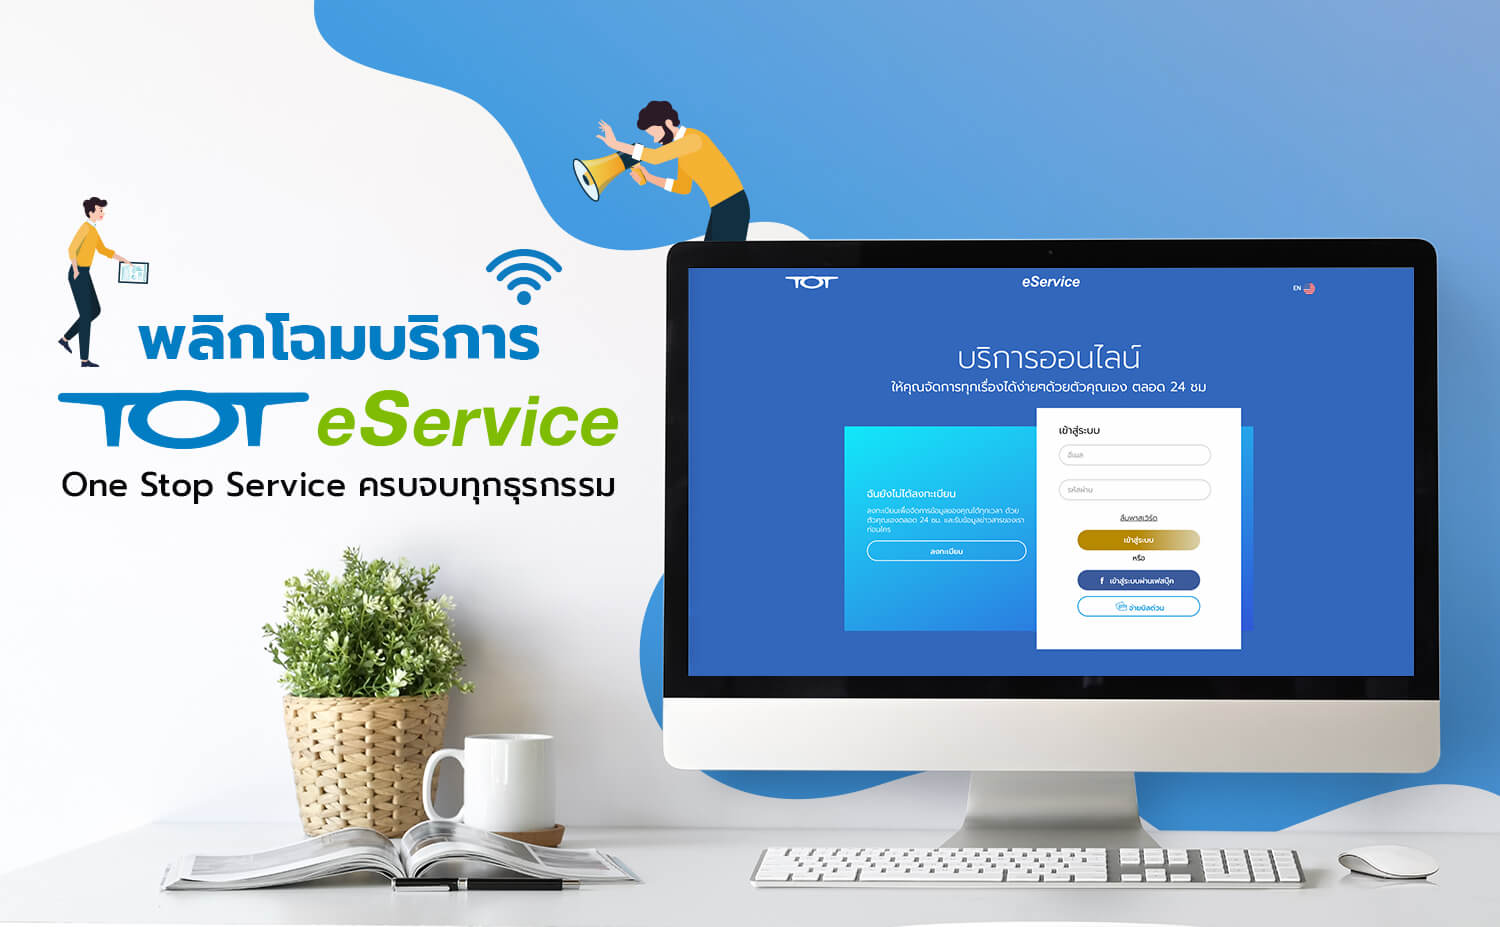 TOT-Article1-eService-One-Stop-Service